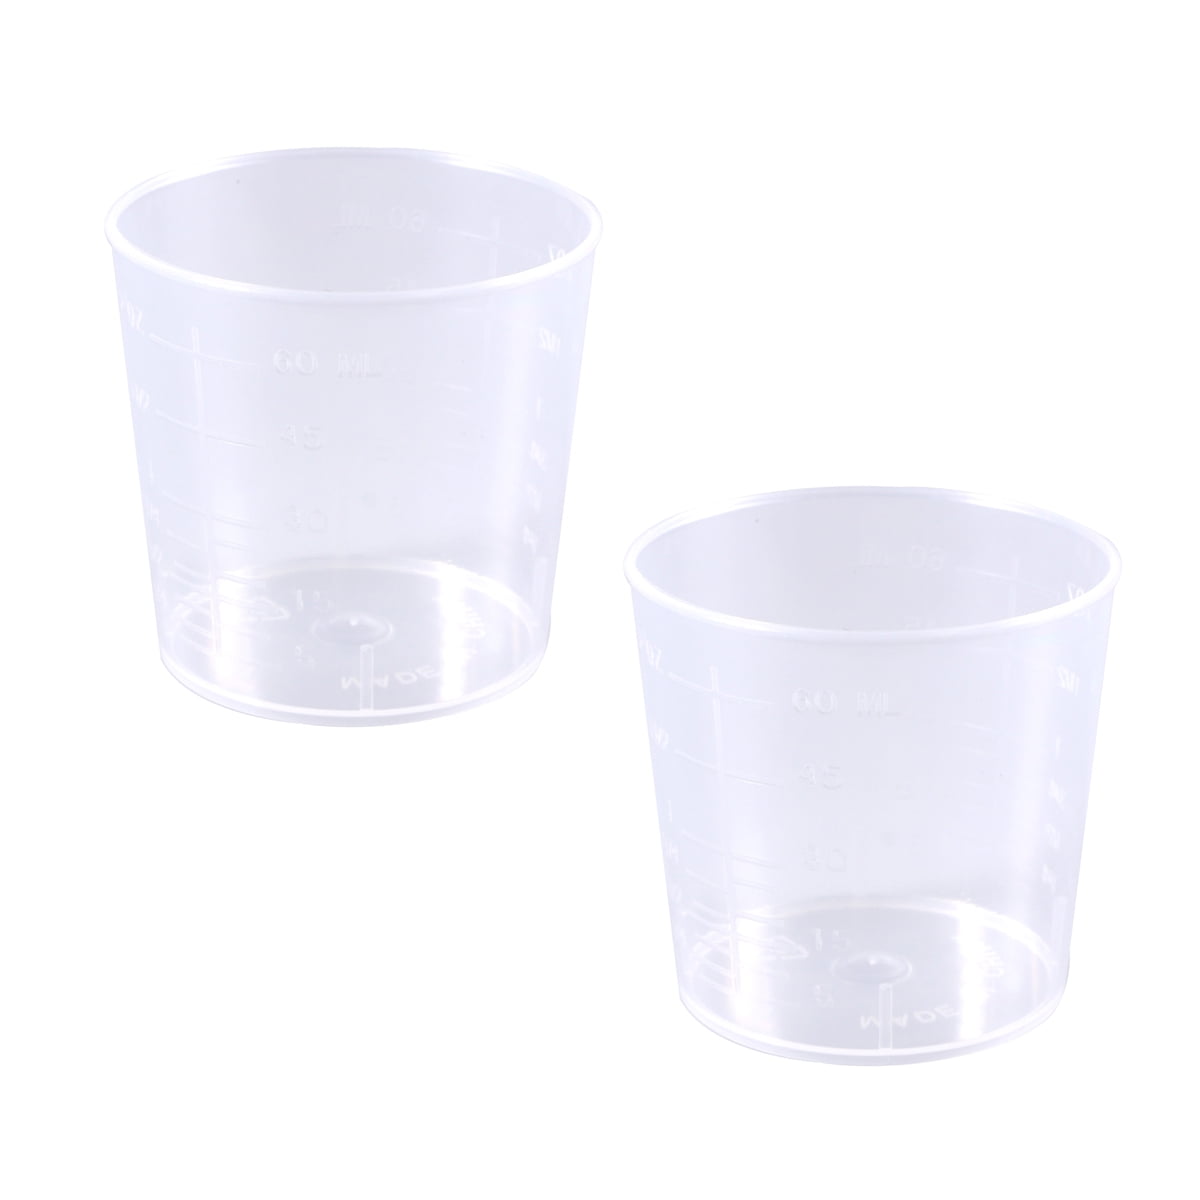 Shatterproof Graduated Mixing Cups Plastic Cups Professional CTransparent Scale Cups Clear Graduated Cups Measuring Cup Lab Supply for Home School NUOBESTY 60ml Scale Cups 40Pcs 